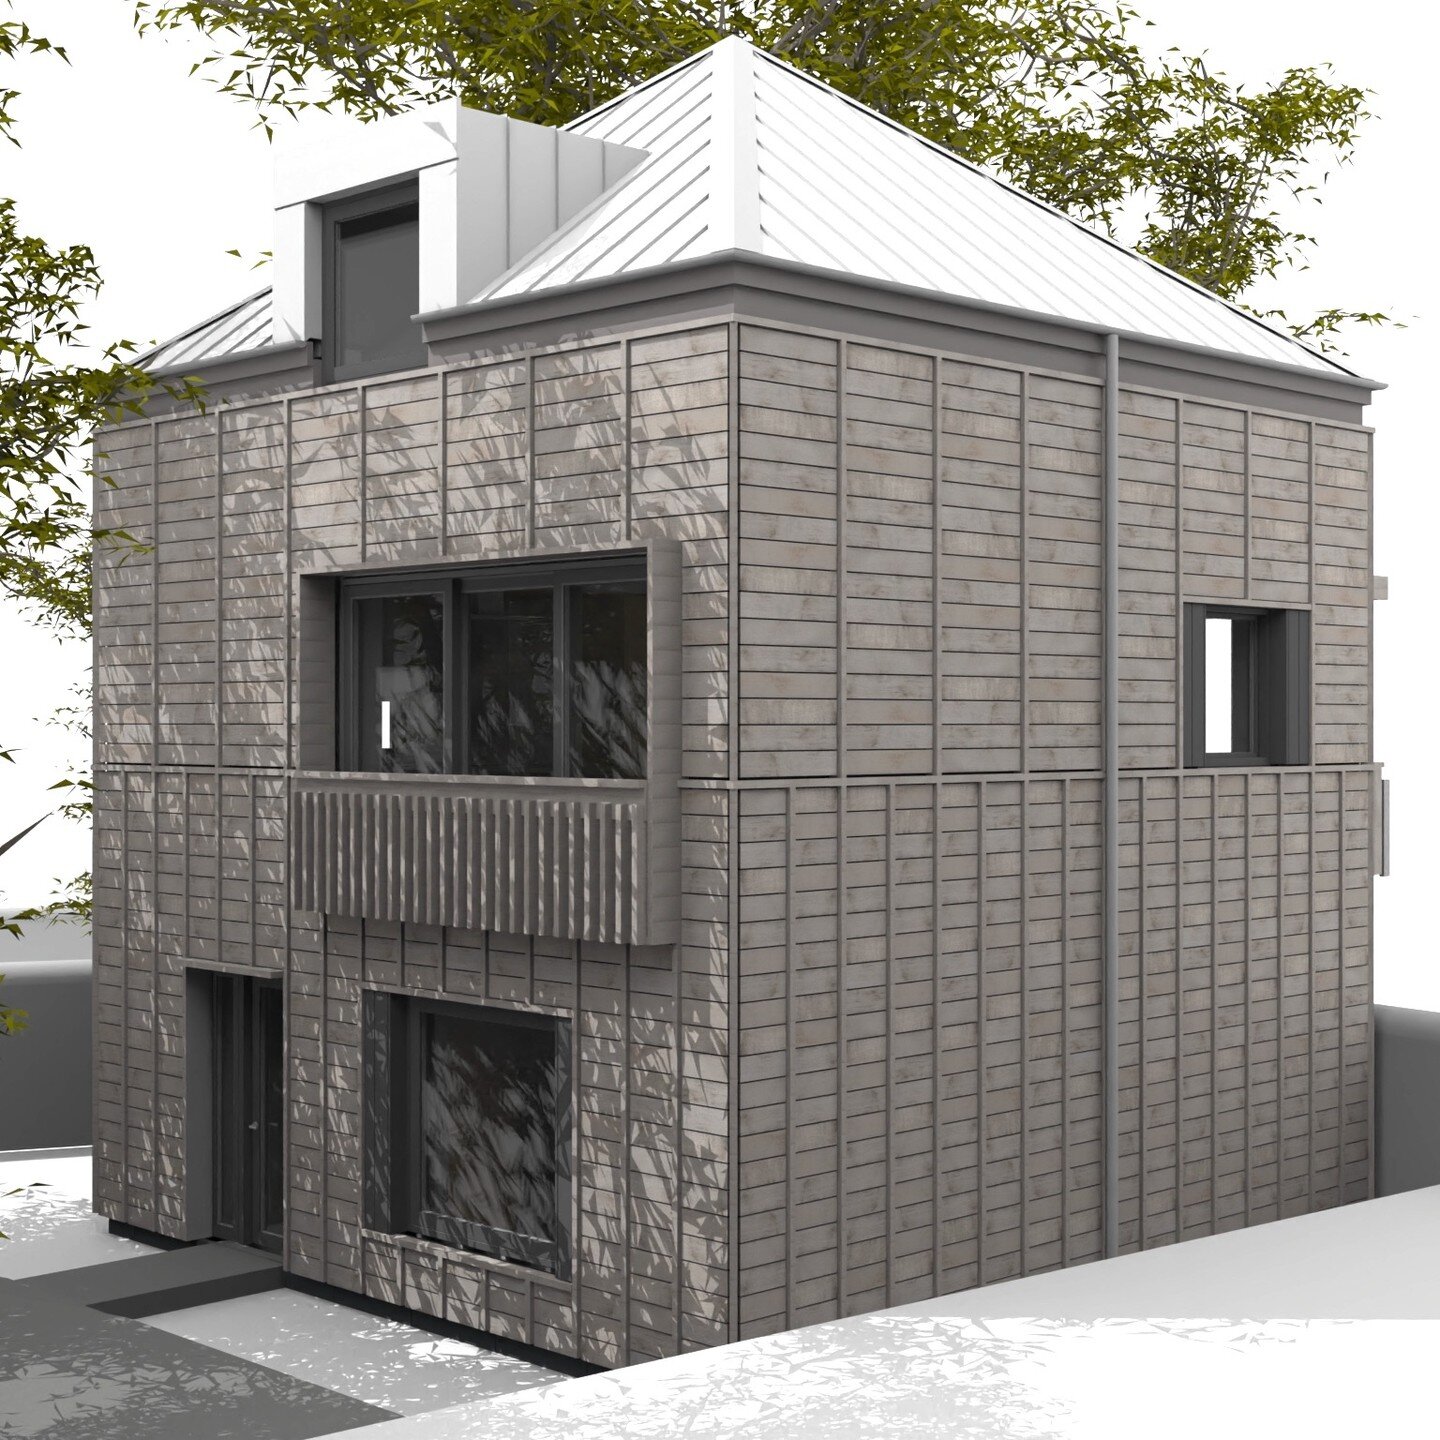 A compact house design for a tight garden plot. Form and construction have been considered to minimise heat loss. Materials and siting have been considered to minimise ecological impacts.